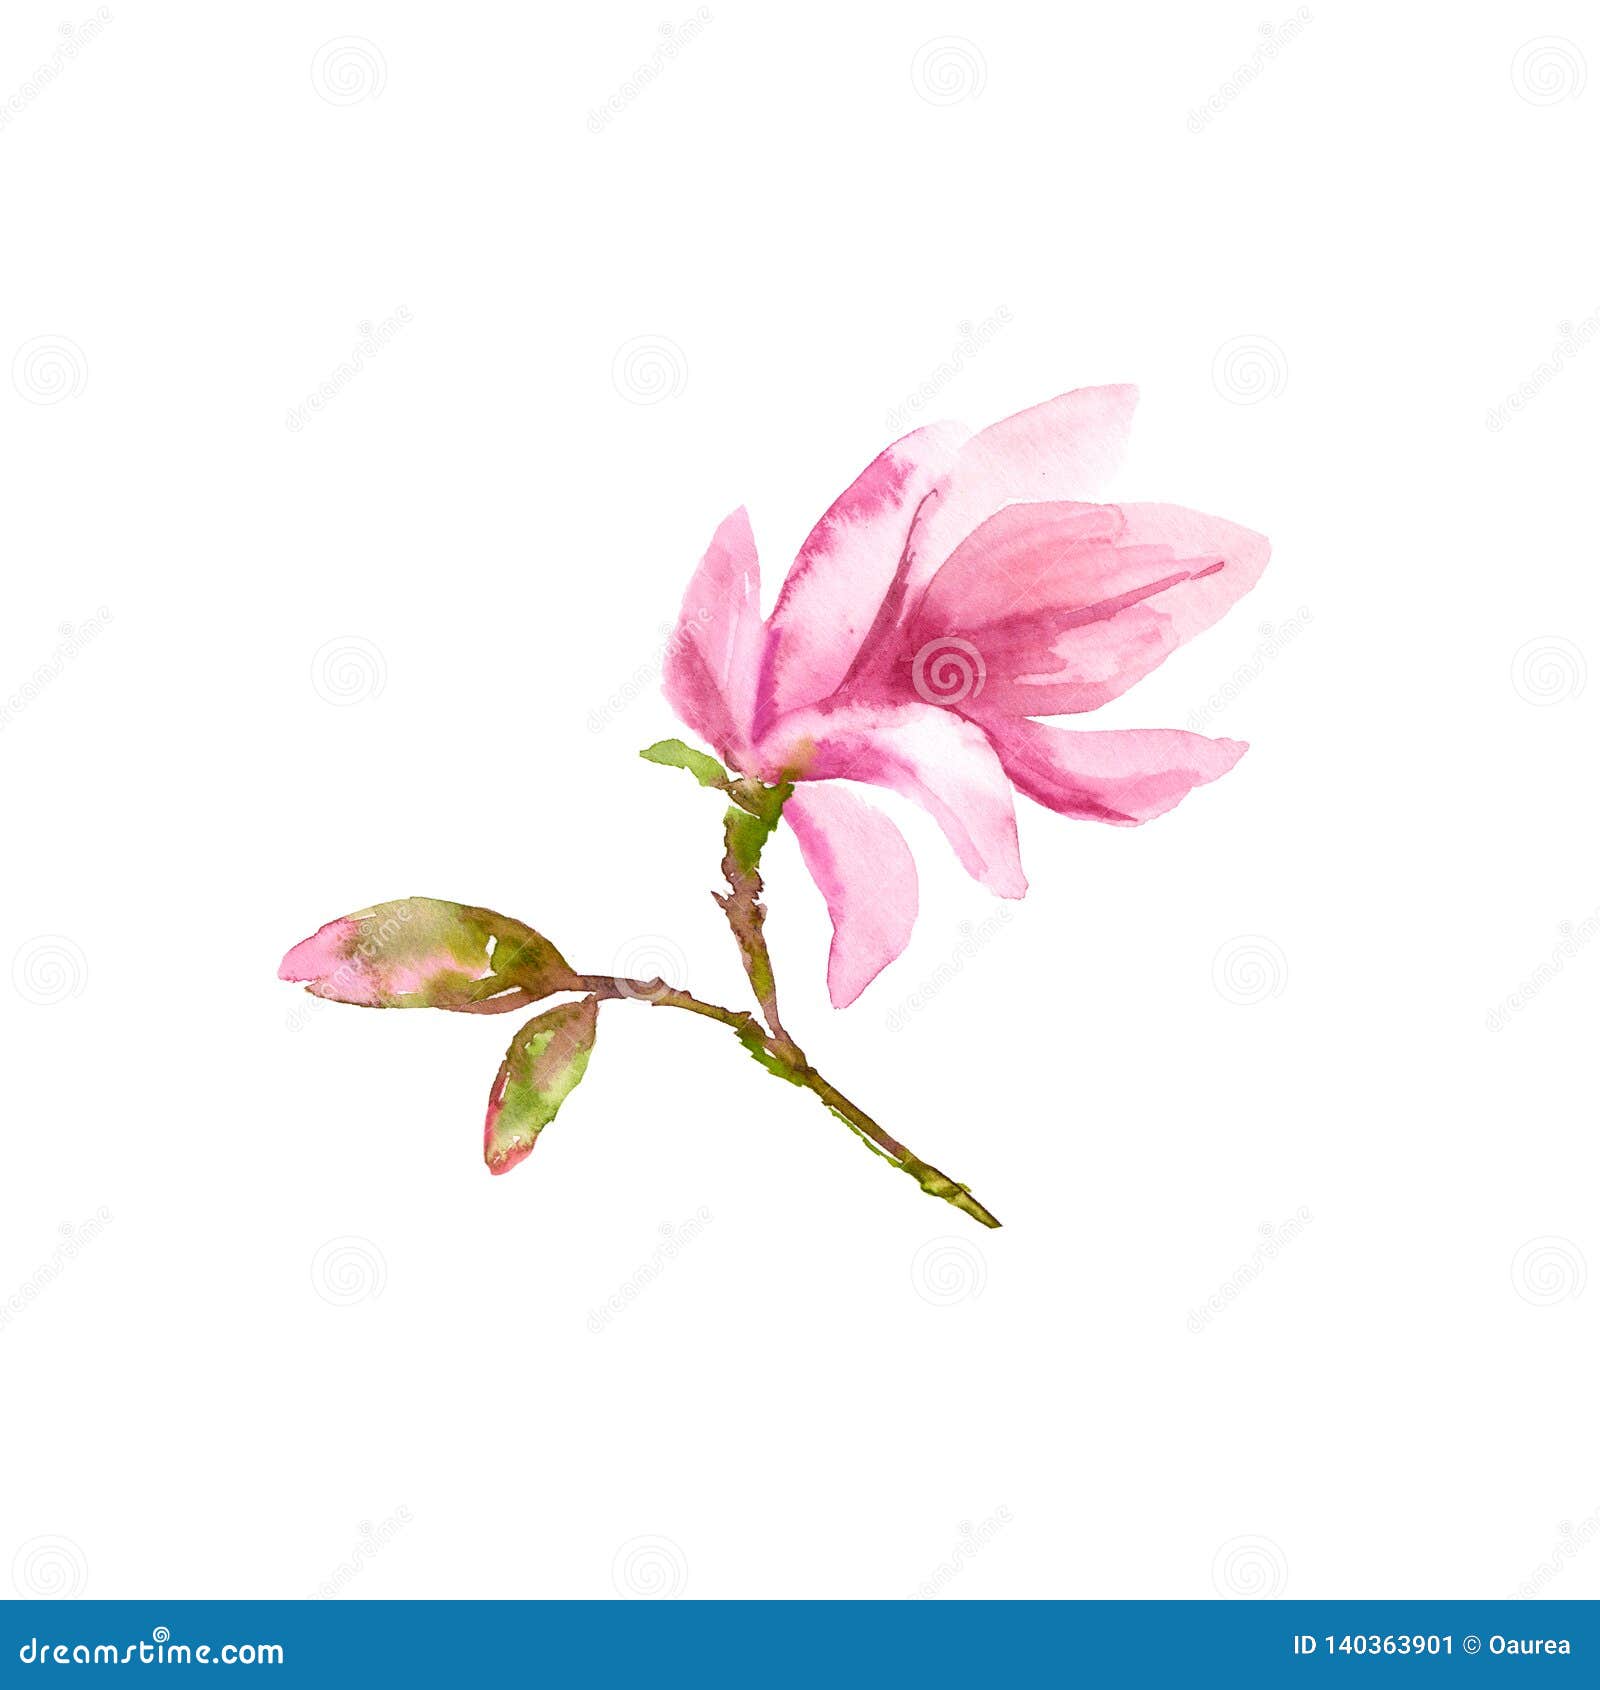 Magnolia Flower Watercolor Flower Floral Branch With Pink Flowers Wedding Invitation Floral Design Spring Greeting Card Stock Illustration Illustration Of Bouquet Drawing 140363901